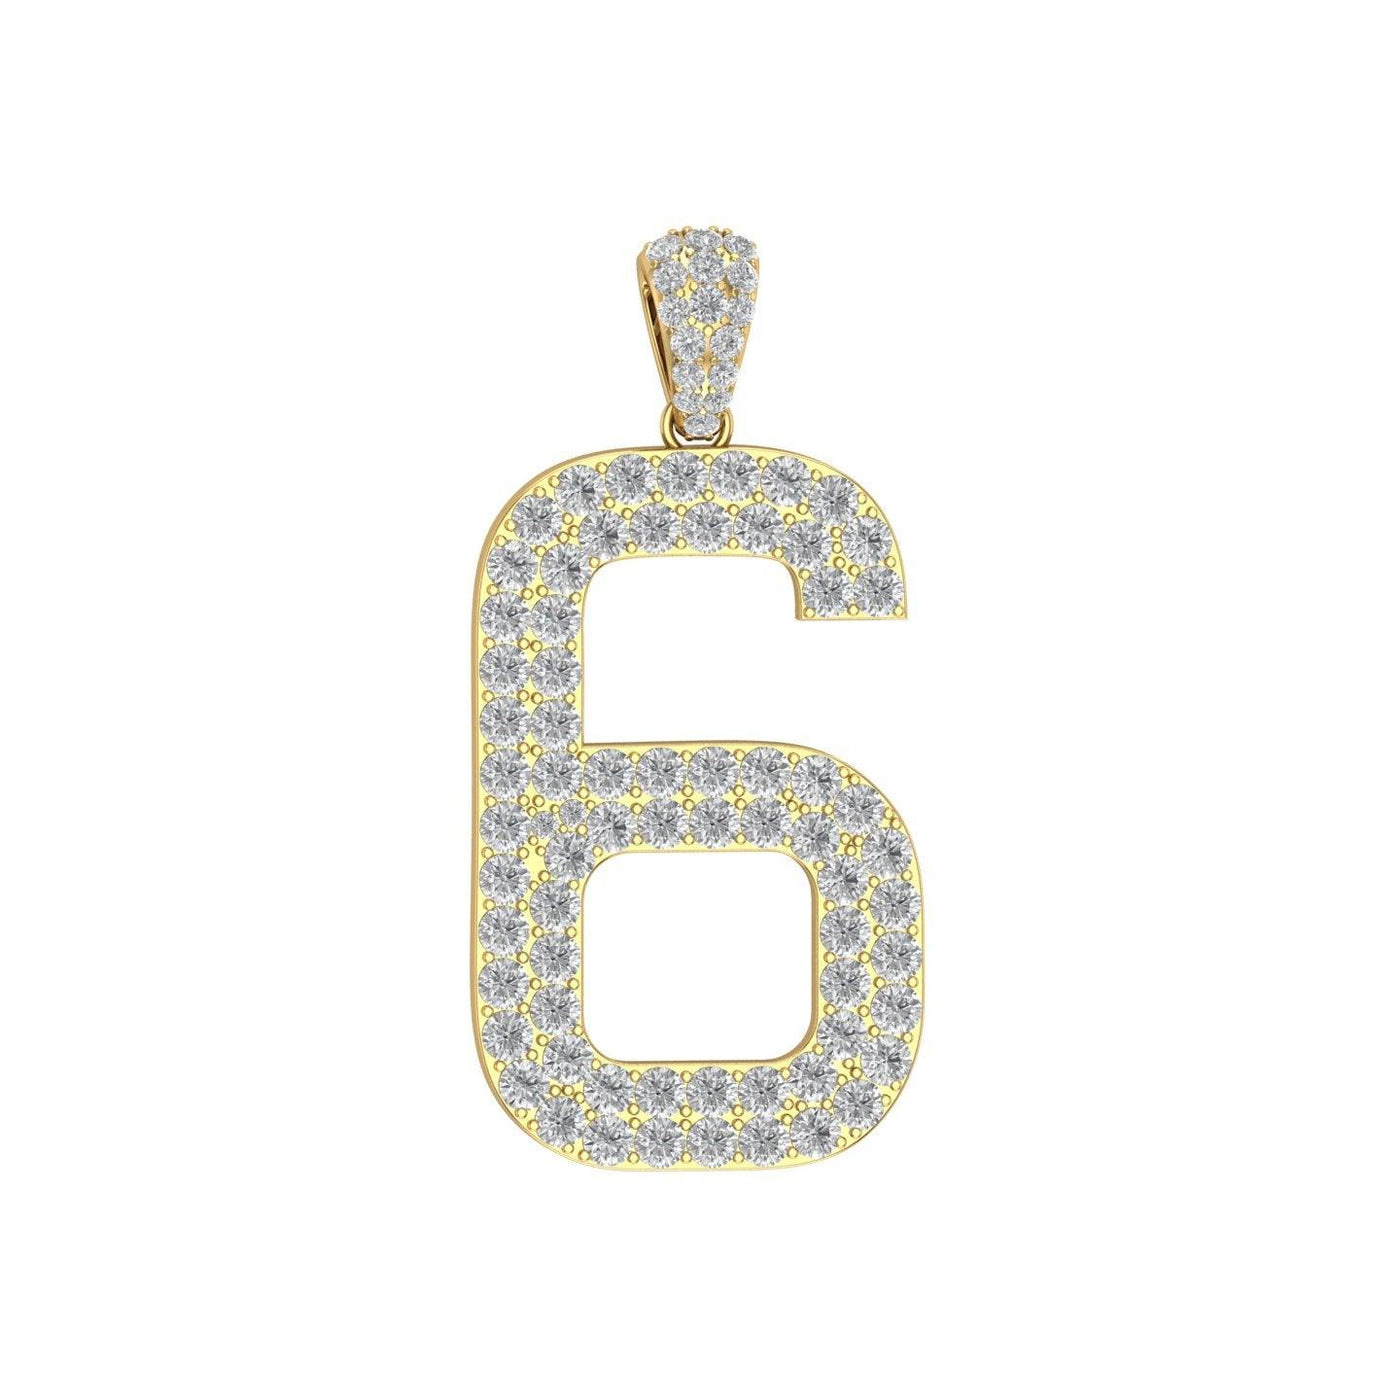 Gold Color Pendant in the Shape of 6 Made of 925 Sterling Silver Material with 20 Inch Long Silver Chain